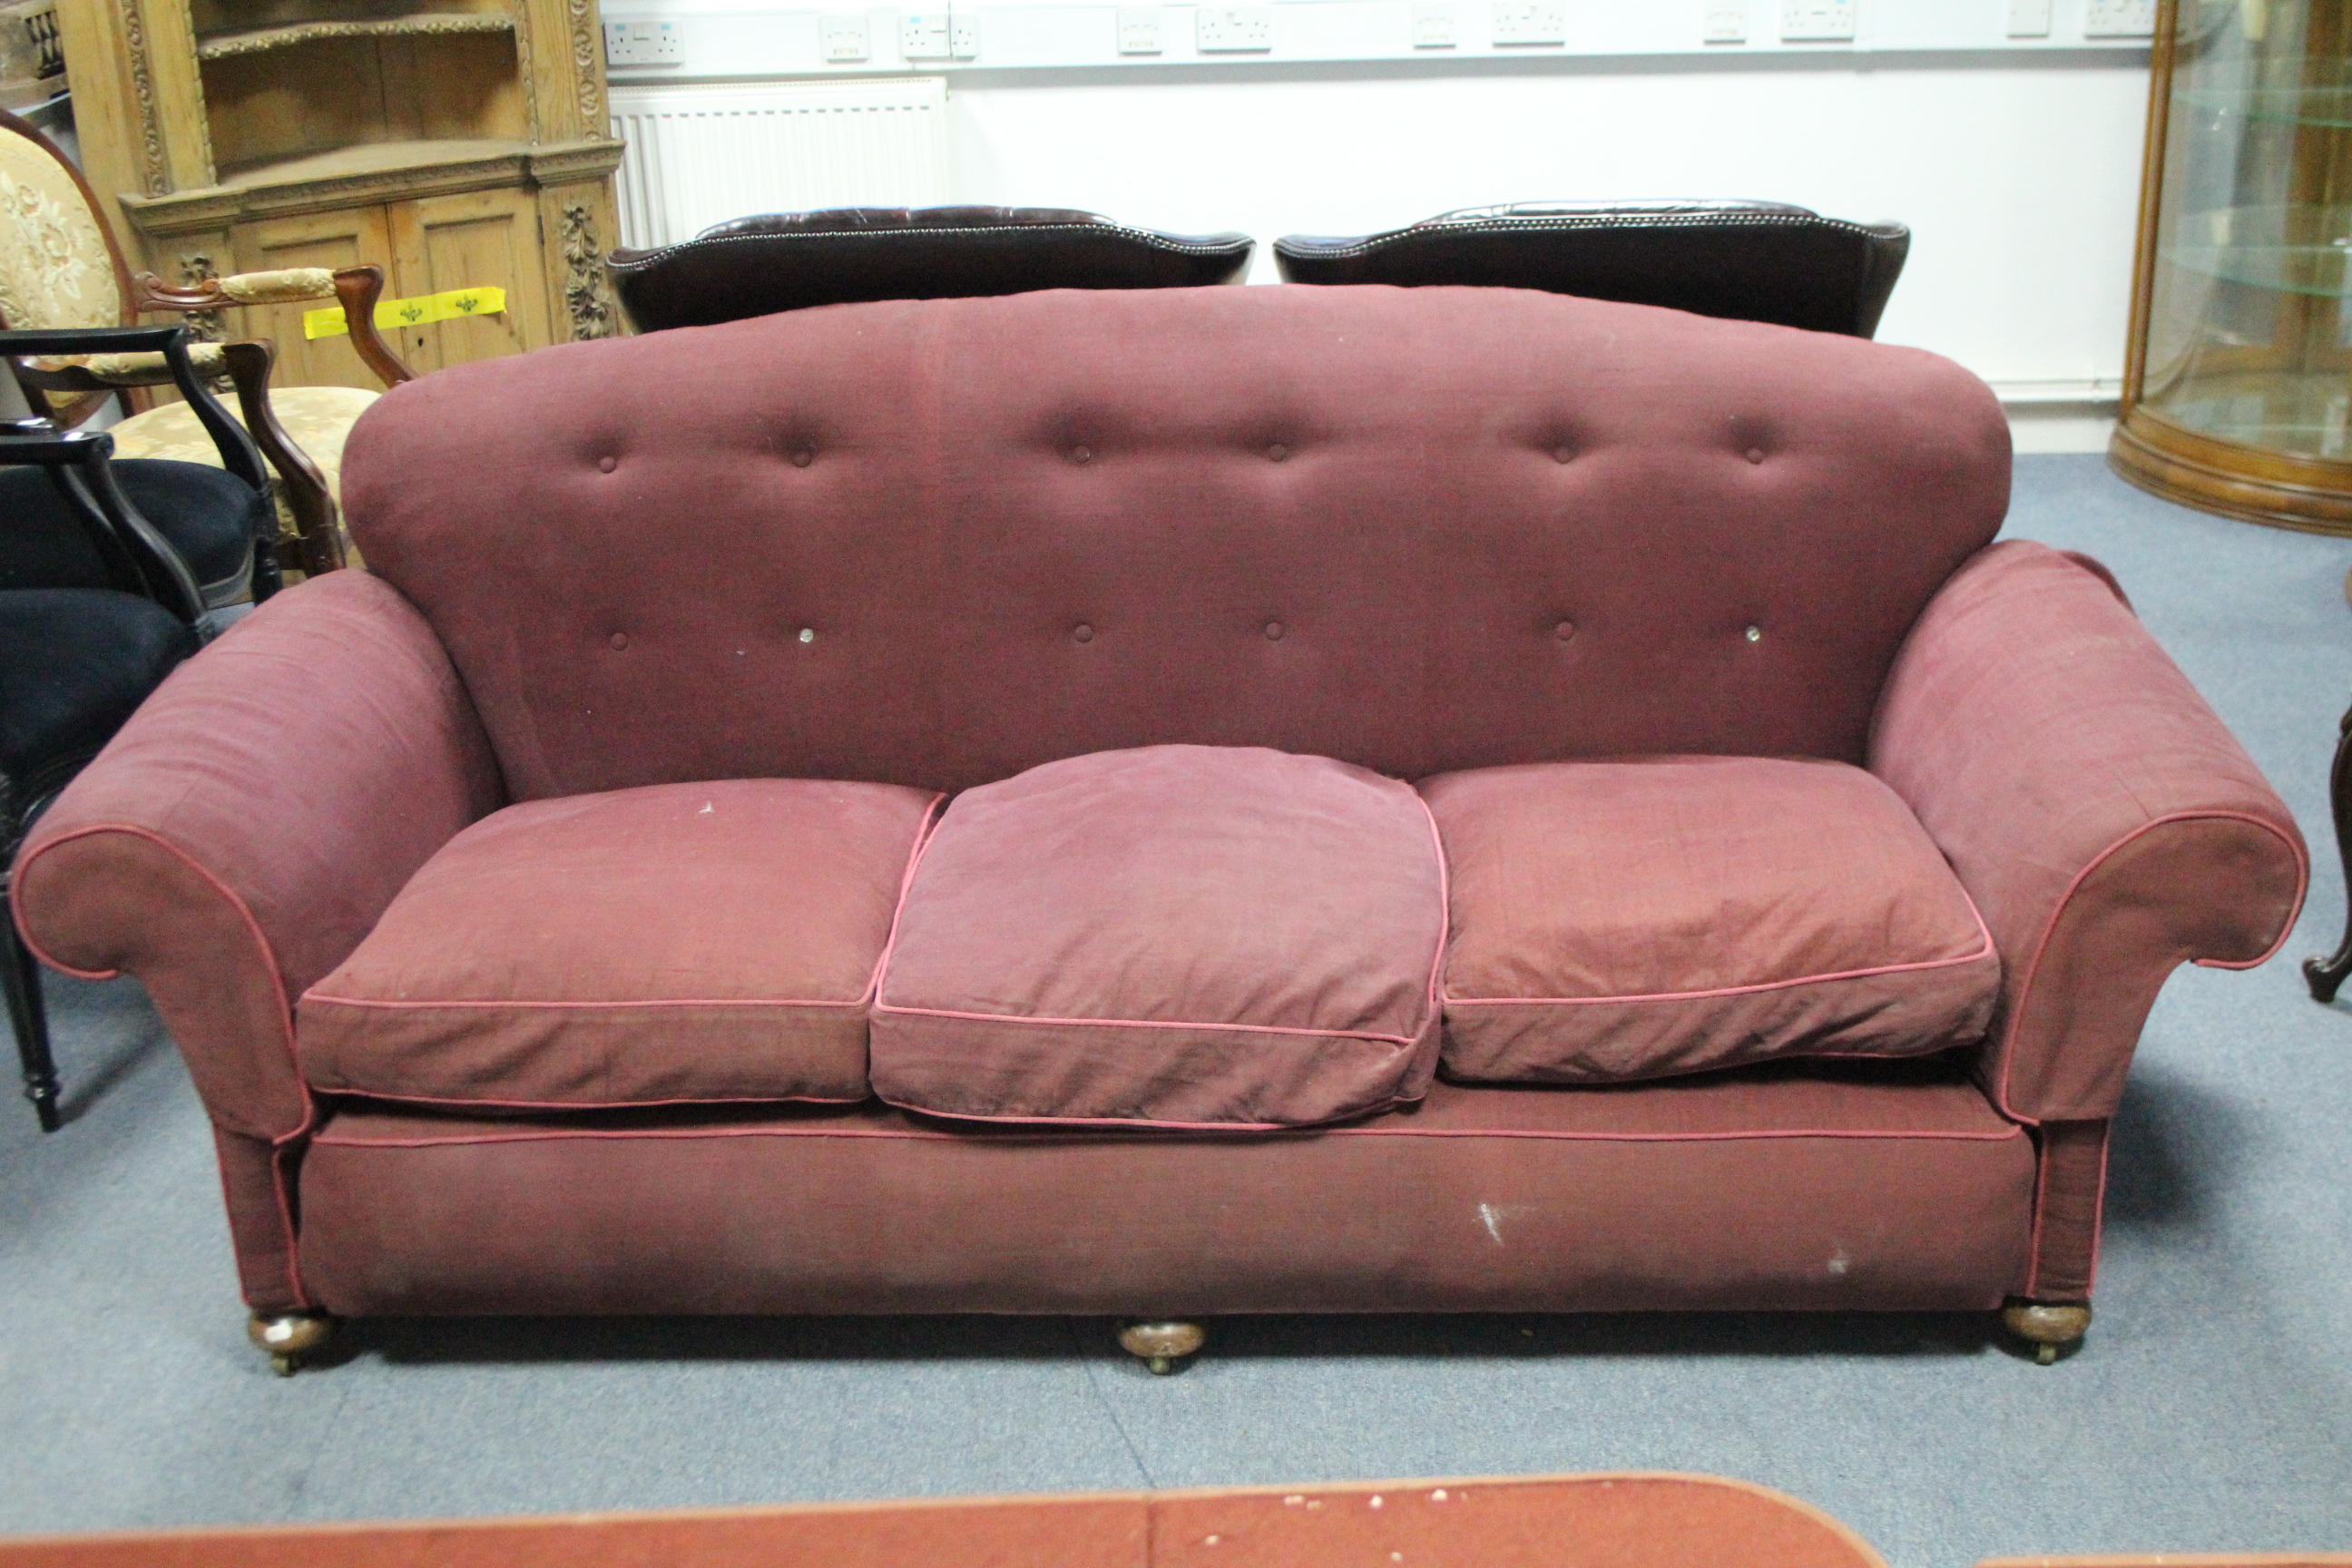 An early 20th century three-seat sofa upholstered burgundy fabric, with rounded buttoned back, - Image 2 of 5